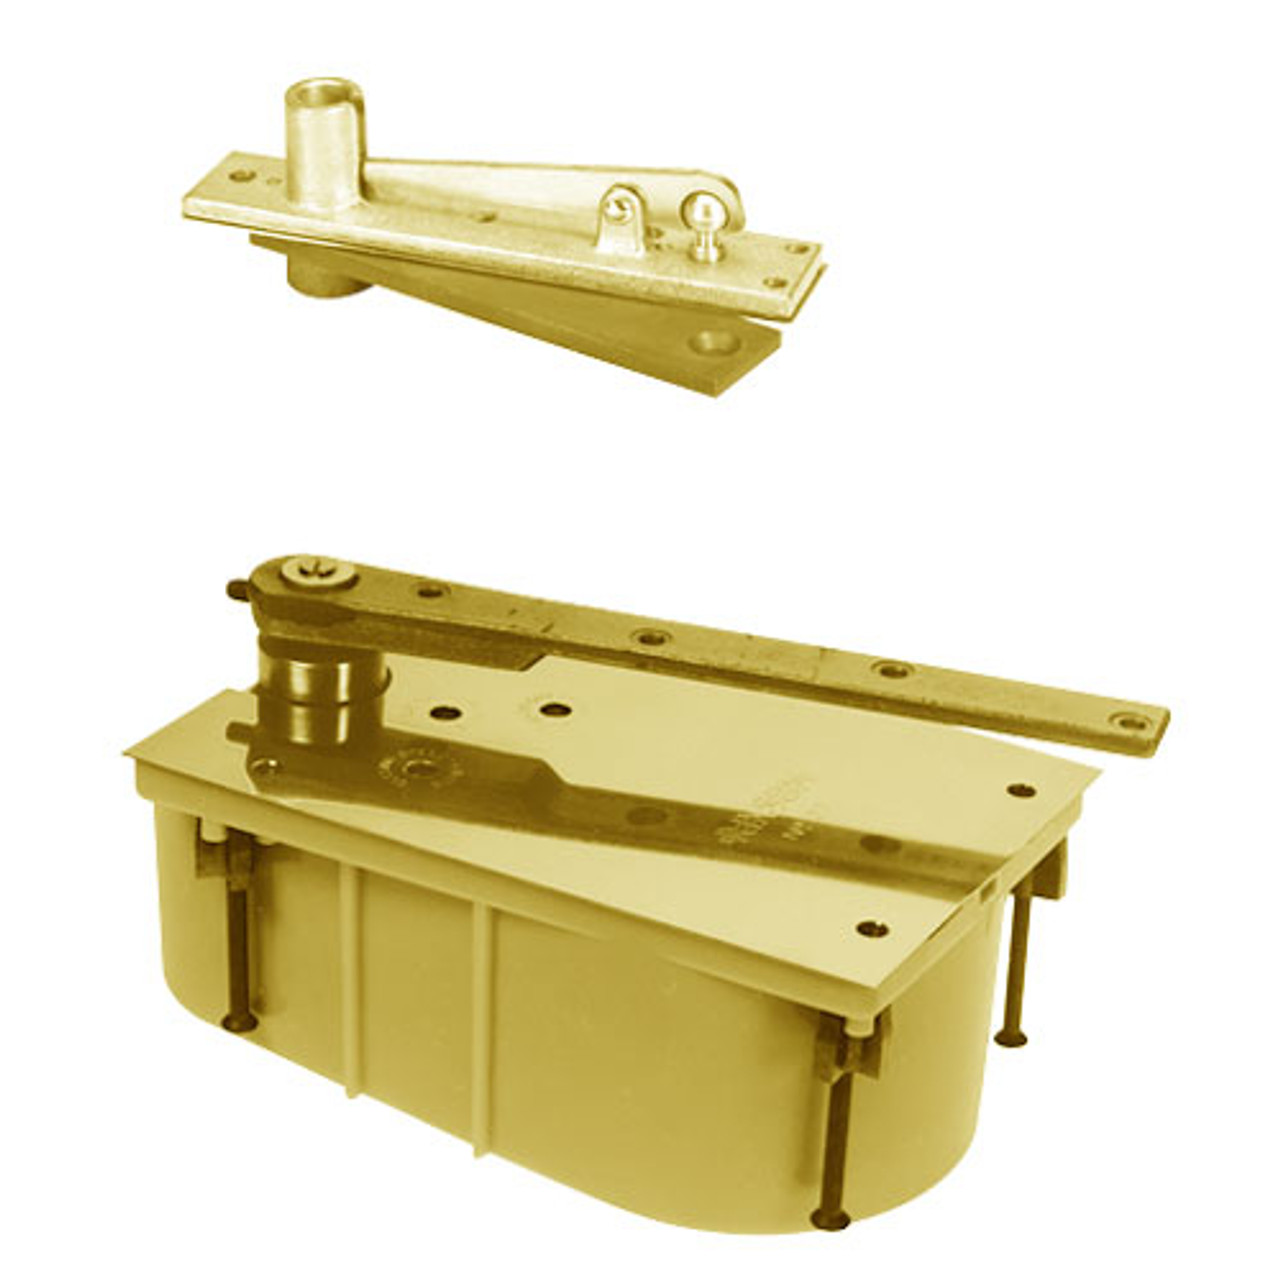 28-105S-554-LFP-LH-605 Rixson 28 Series Heavy Duty Single Acting Center Hung Floor Closer with Concealed Arm in Bright Brass Finish